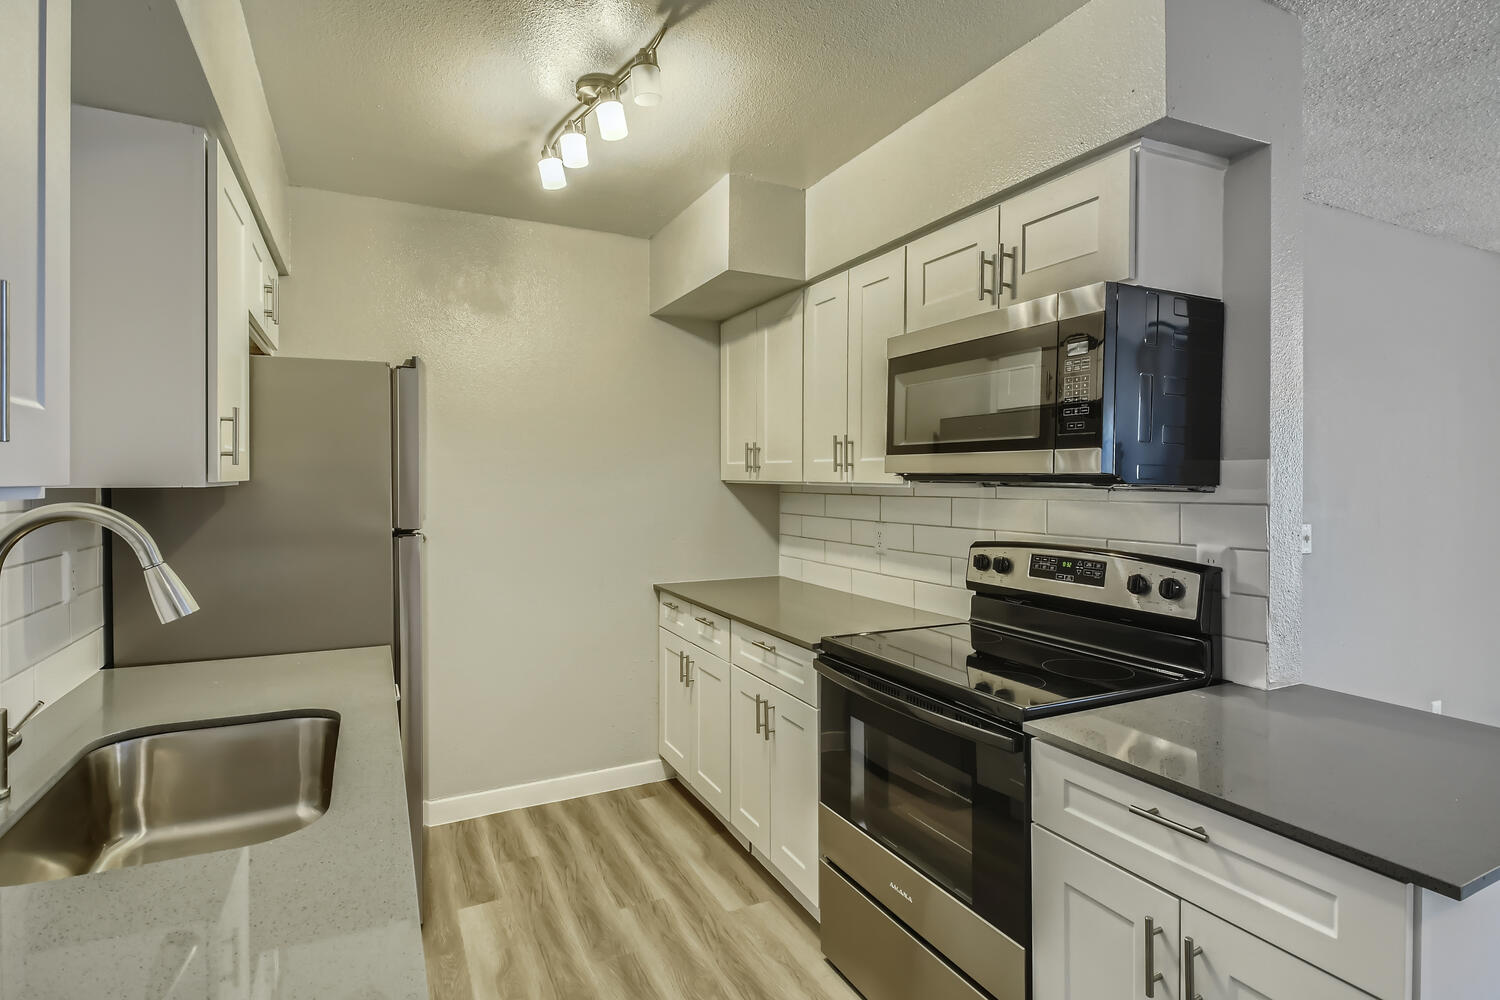 A remodeled kitchen with stainless steel appliances and a backsplash at Rise North Ridge.